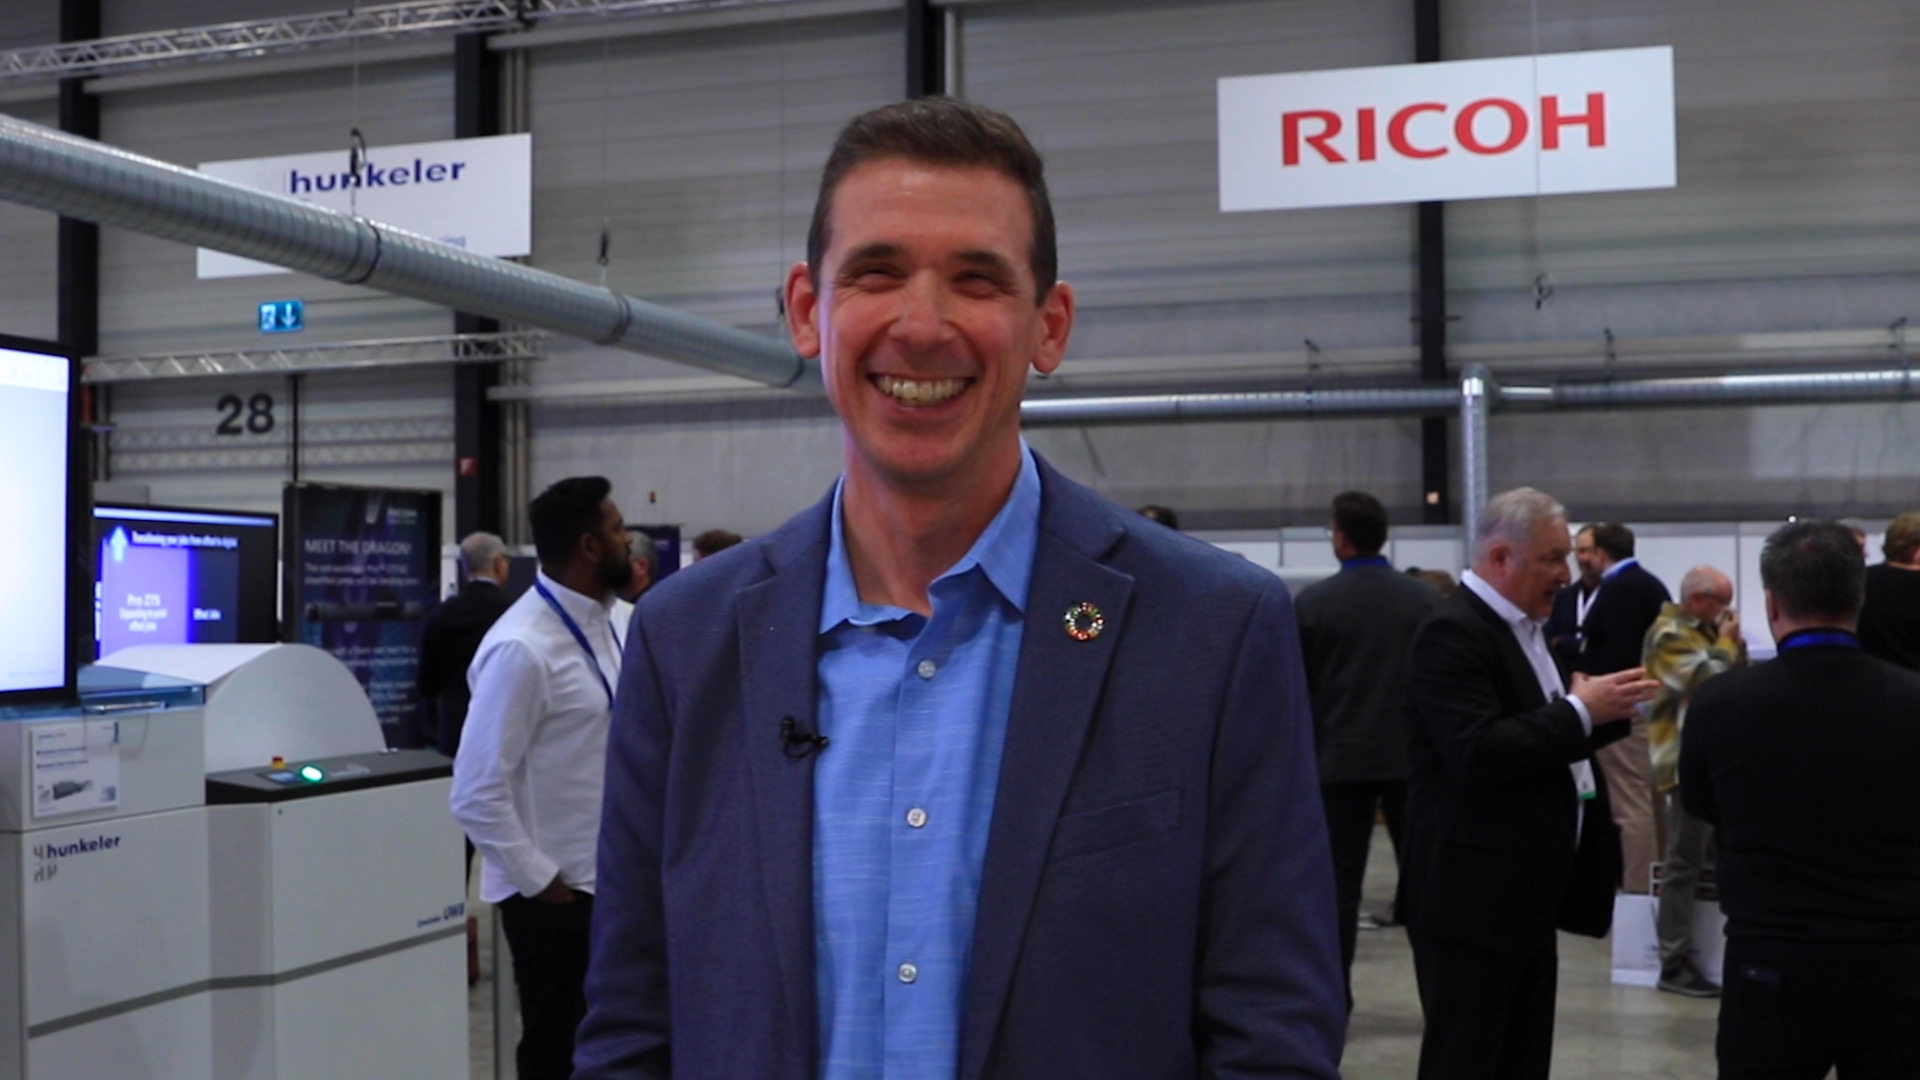 Product Strategy: Ricoh at Hunkeler Innovationdays 2023